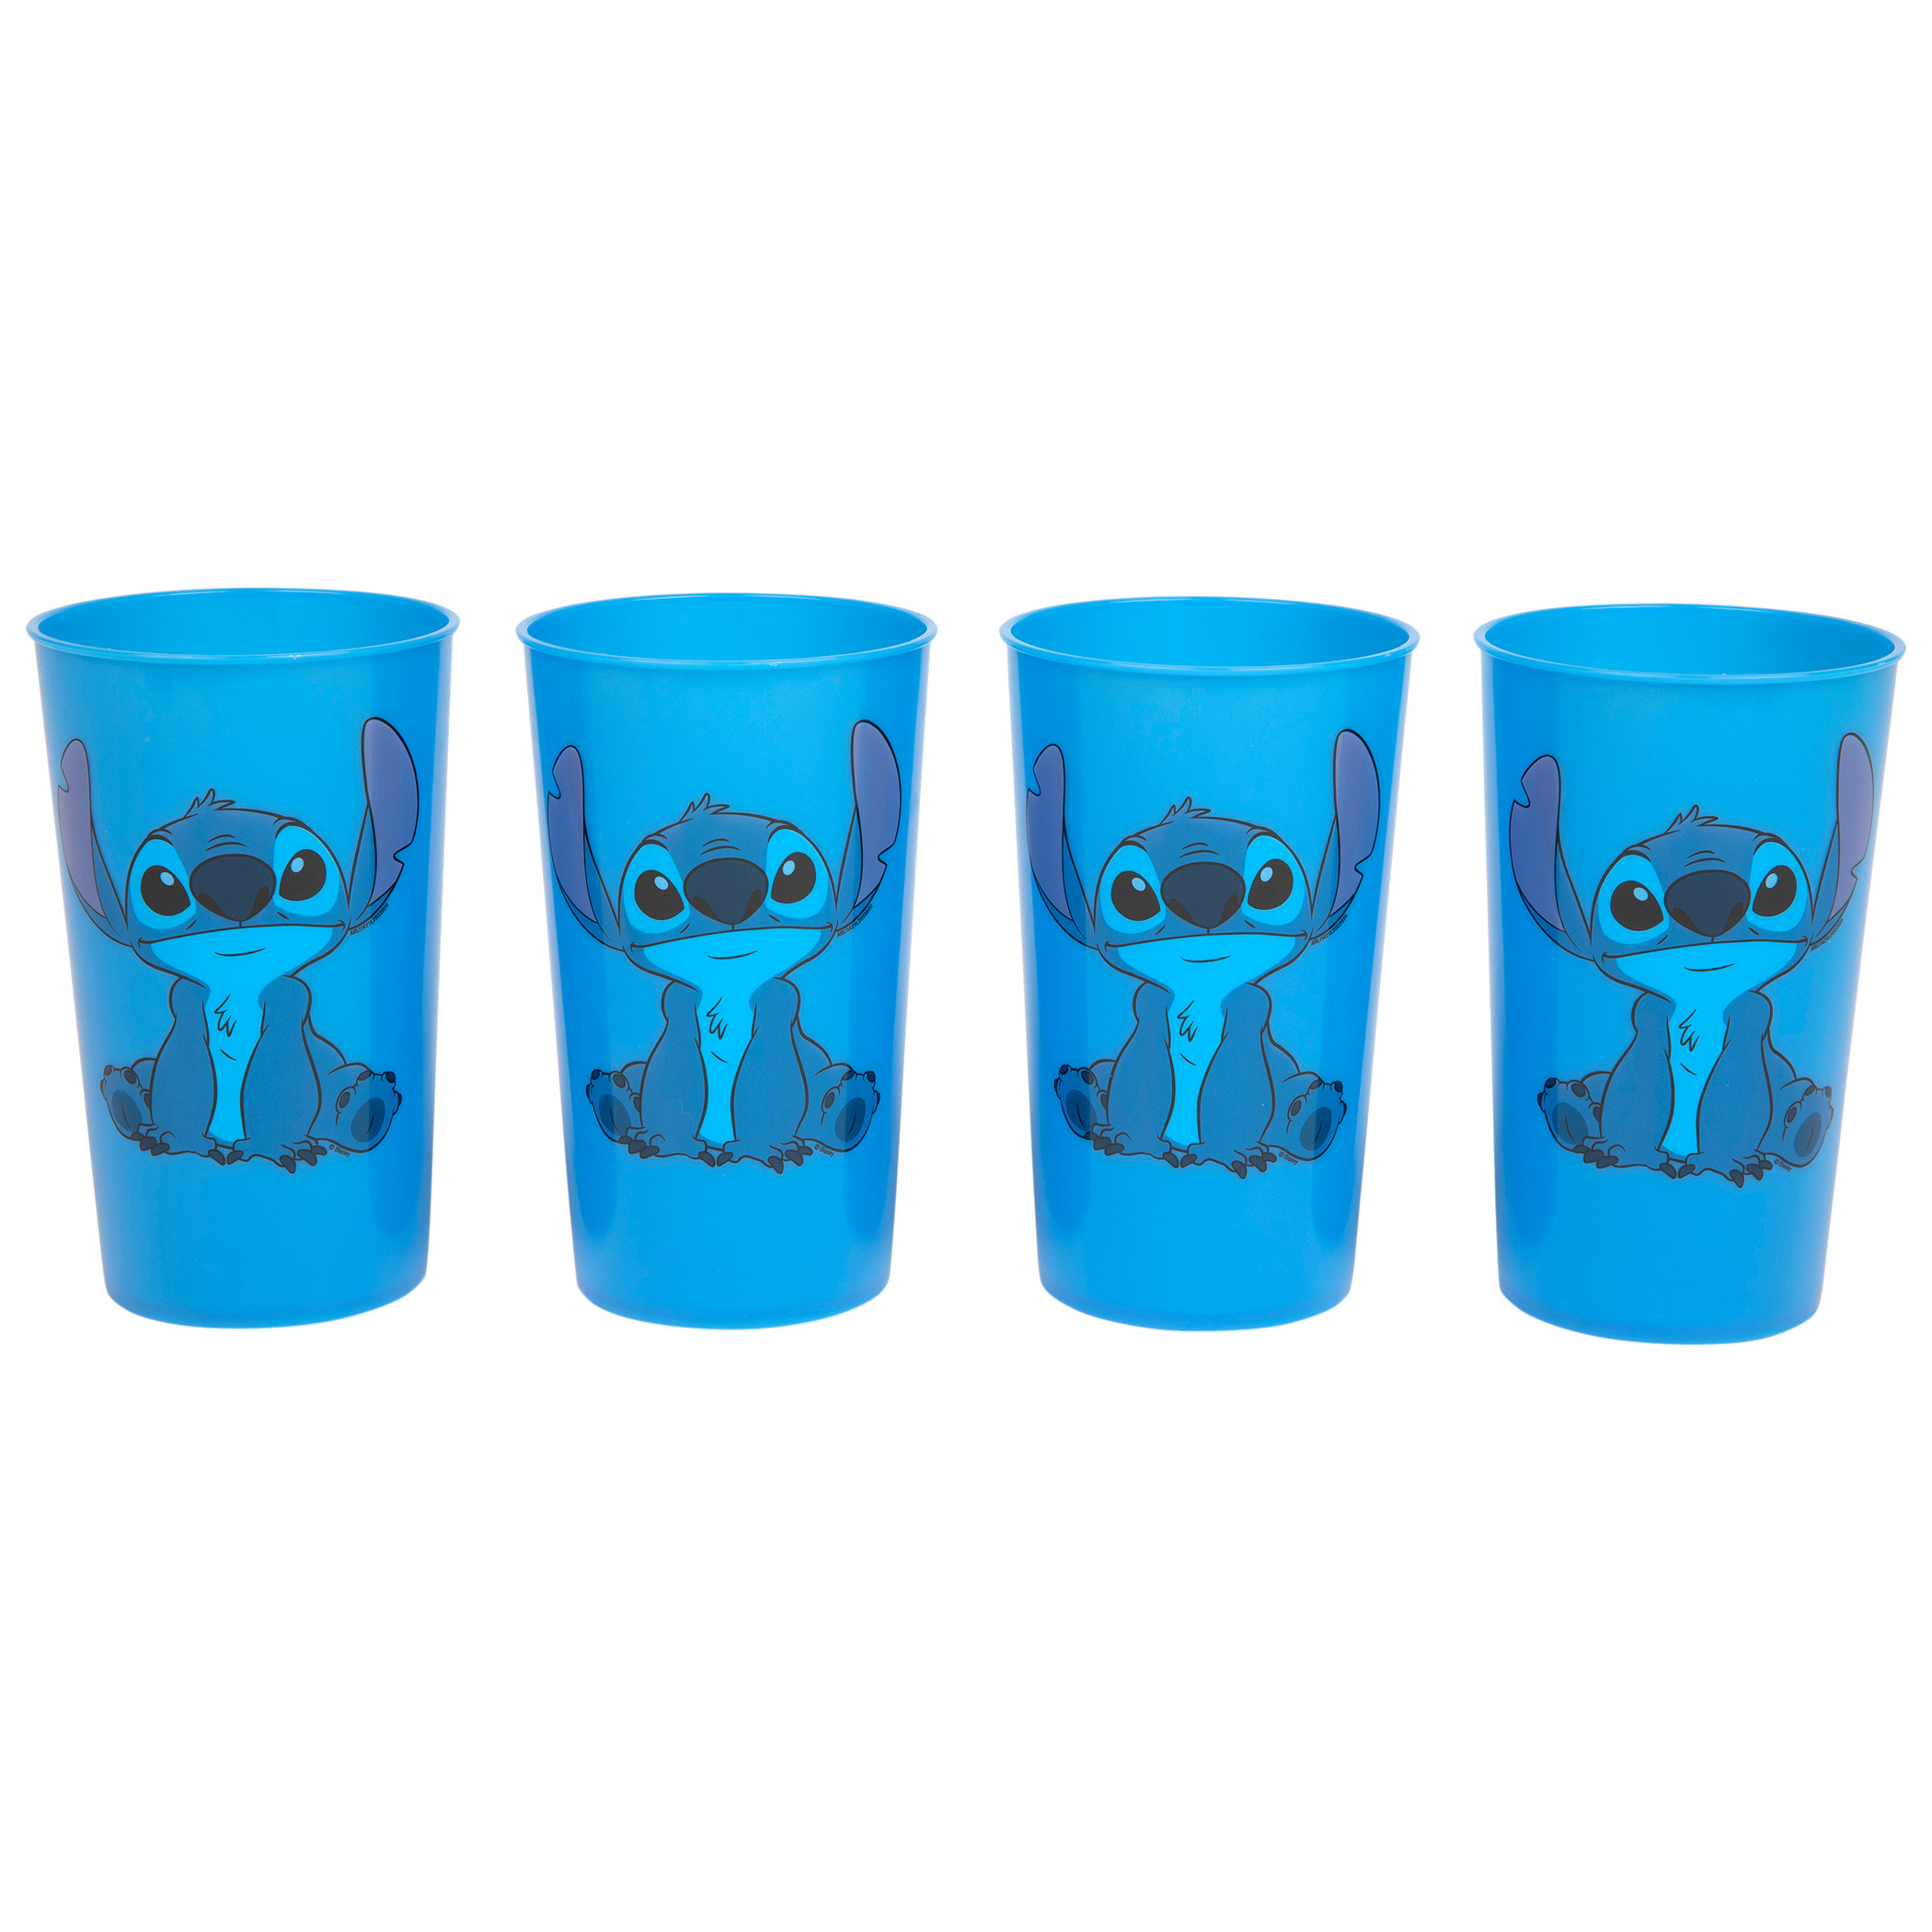 Lilo And Stitch 4 Pack Color Changing Cup